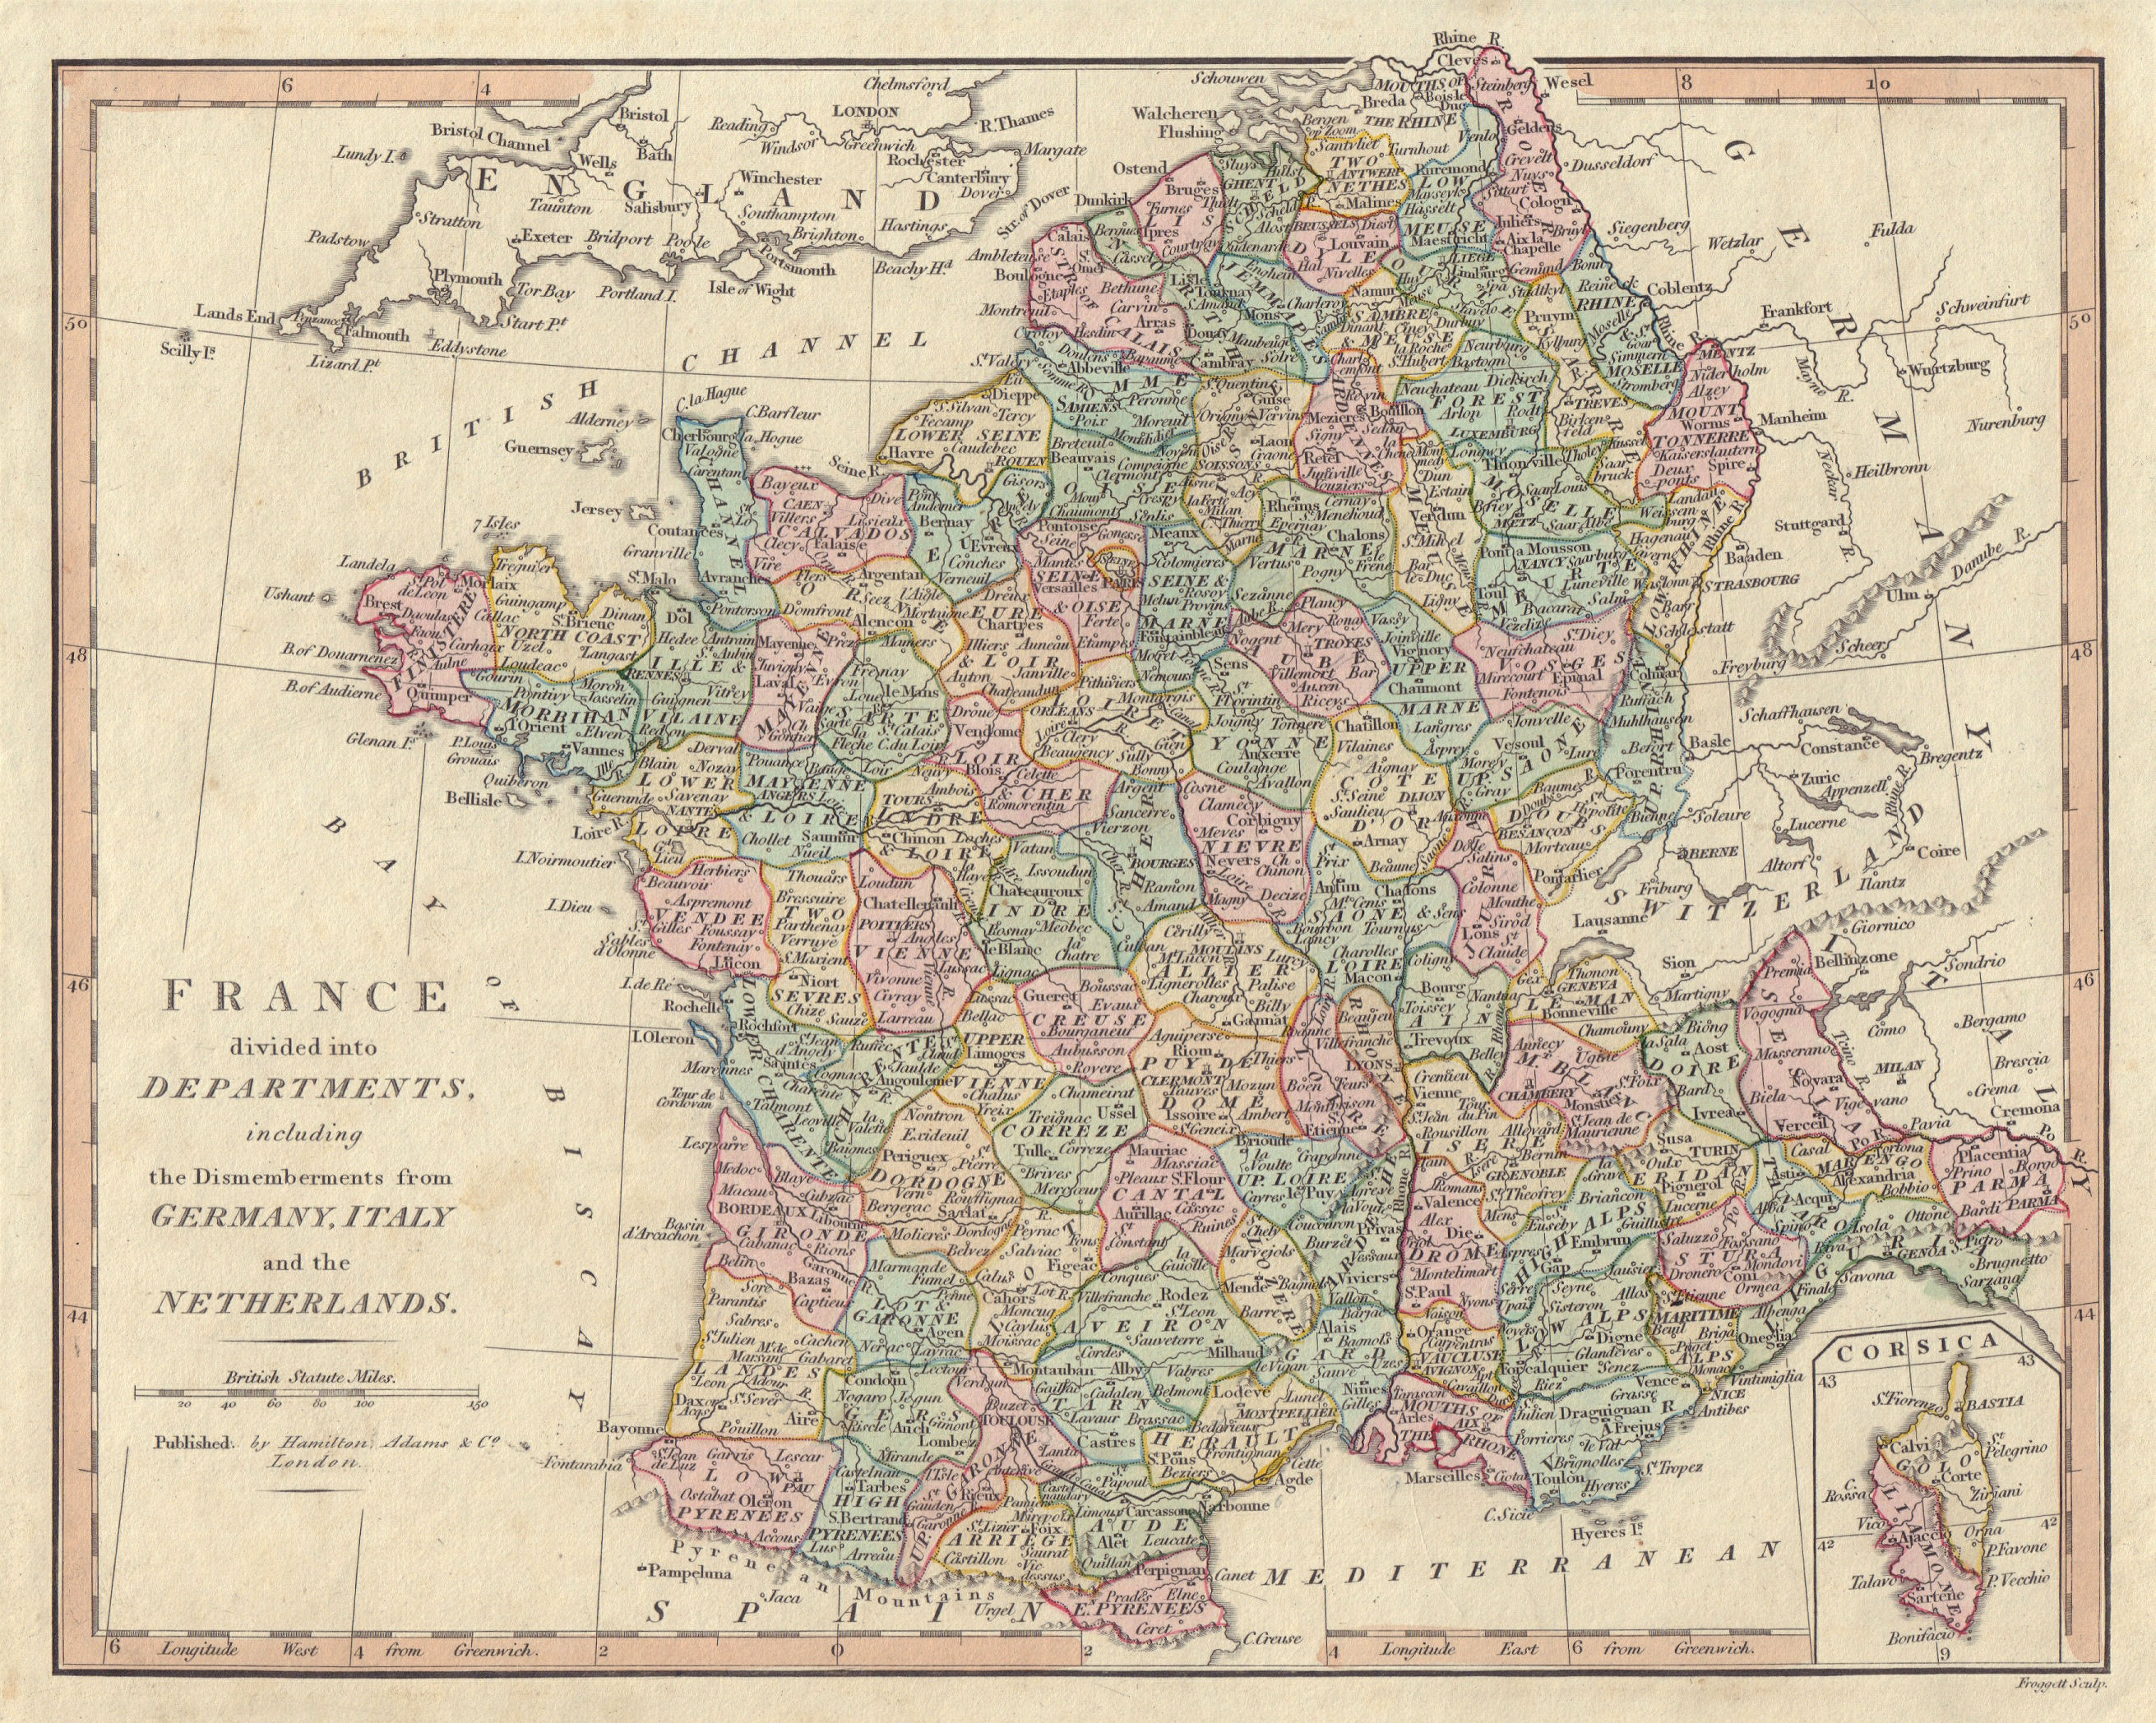 France divided into Departments including the dismemberments… WILKINSON 1828 map